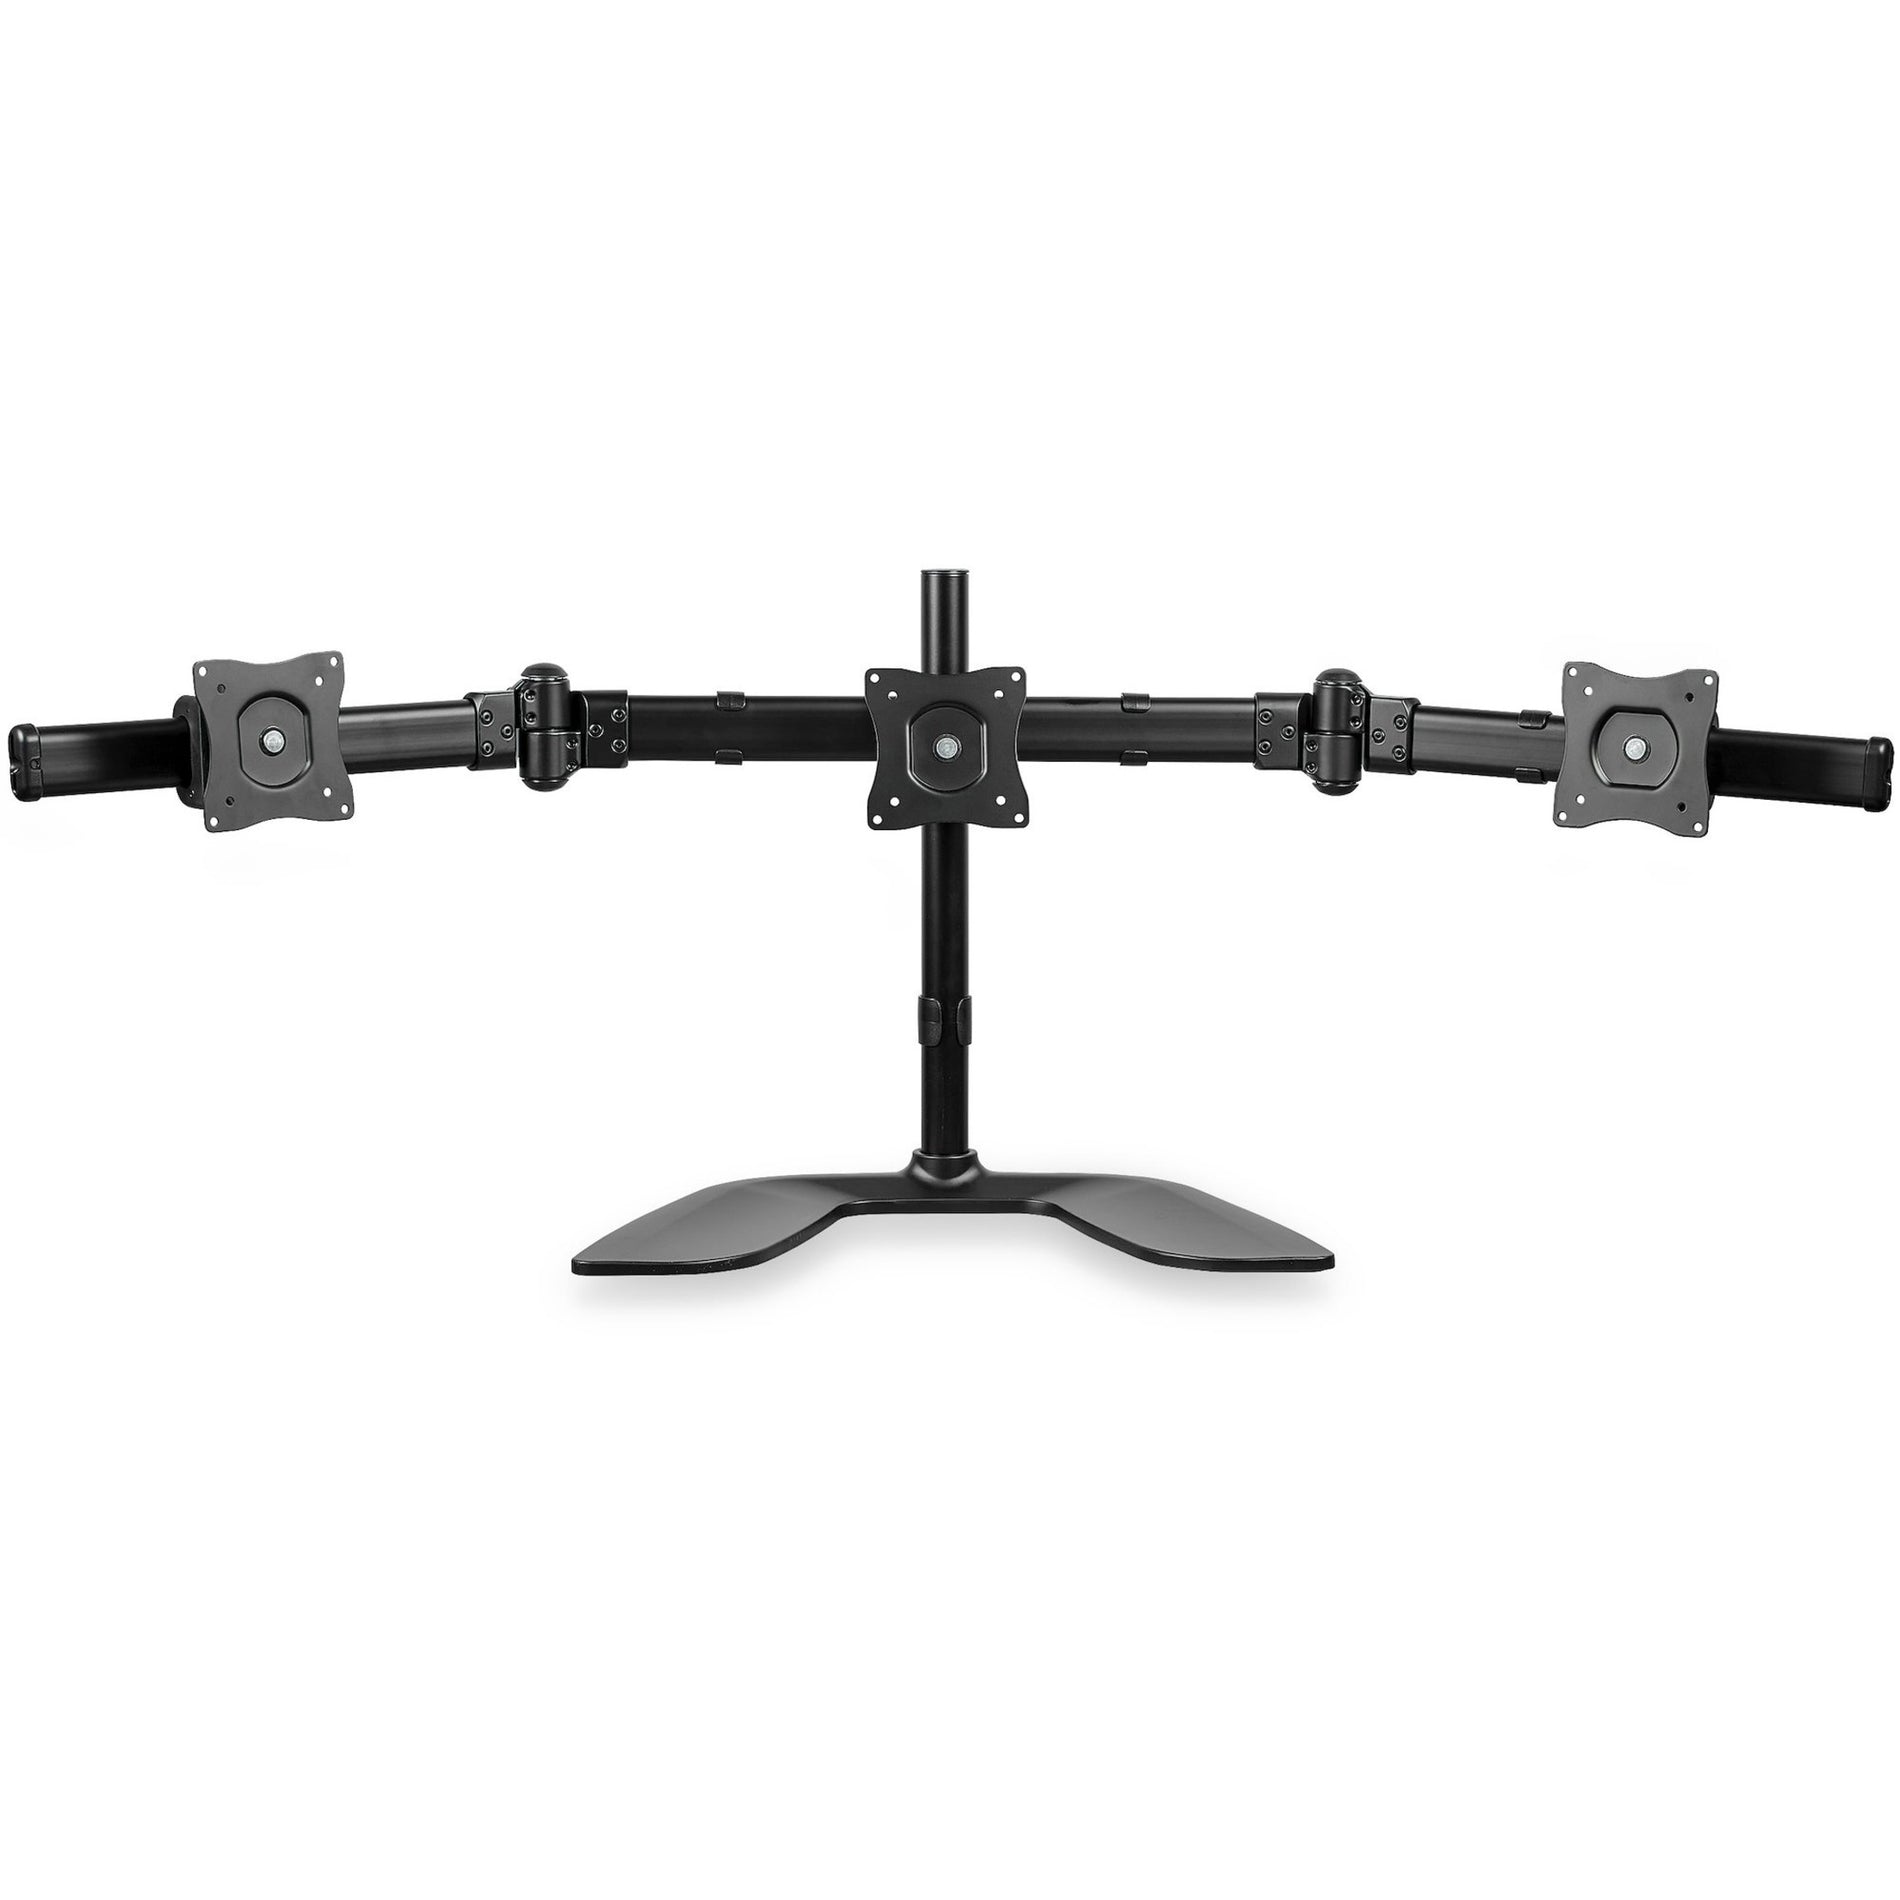 StarTech.com ARMBARTRIO2 Triple-Monitor Desktop Stand - Articulating, 360° Rotation, Sturdy, Scratch Resistant, Heavy Duty, Ergonomic, Cable Management